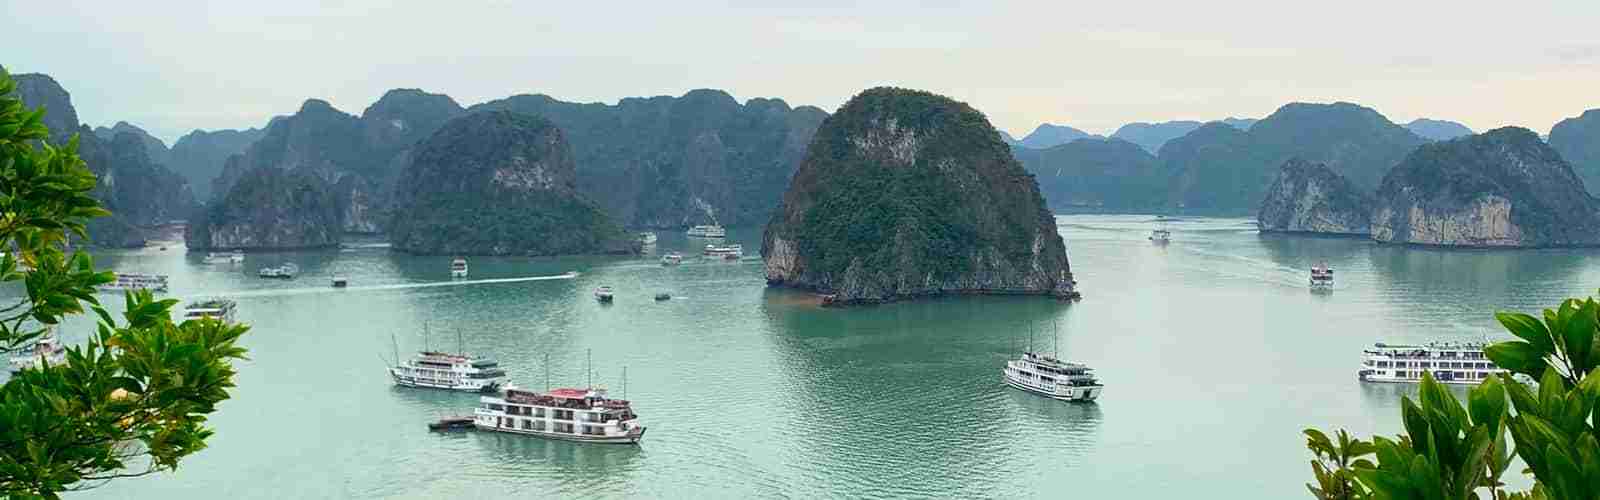 Things To Do In Halong Bay Vietnam Other Than Cruises